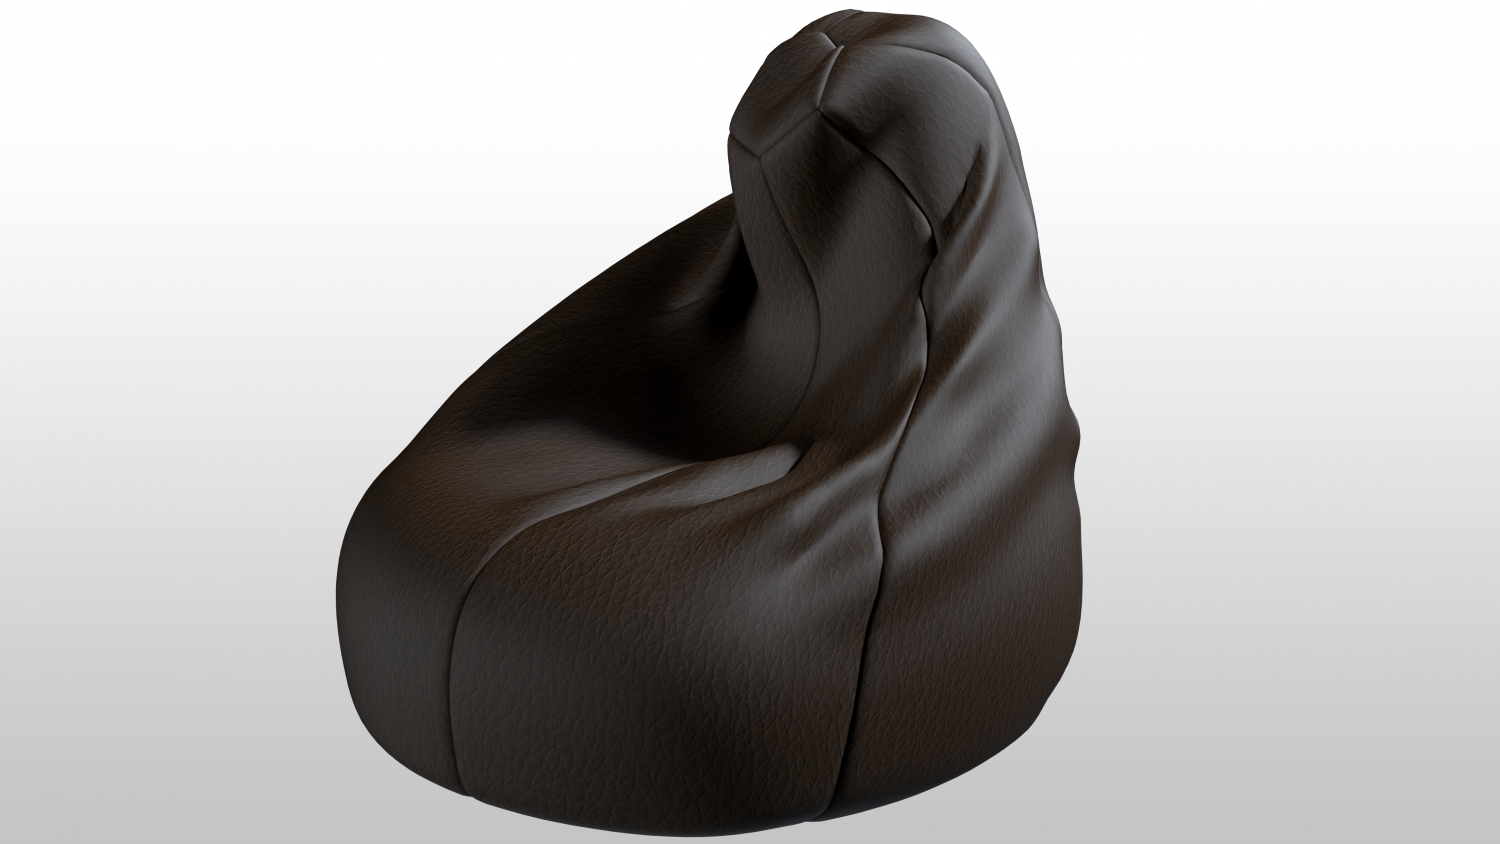 Modeling a Bean Bag Chair in 3ds Max - YouTube